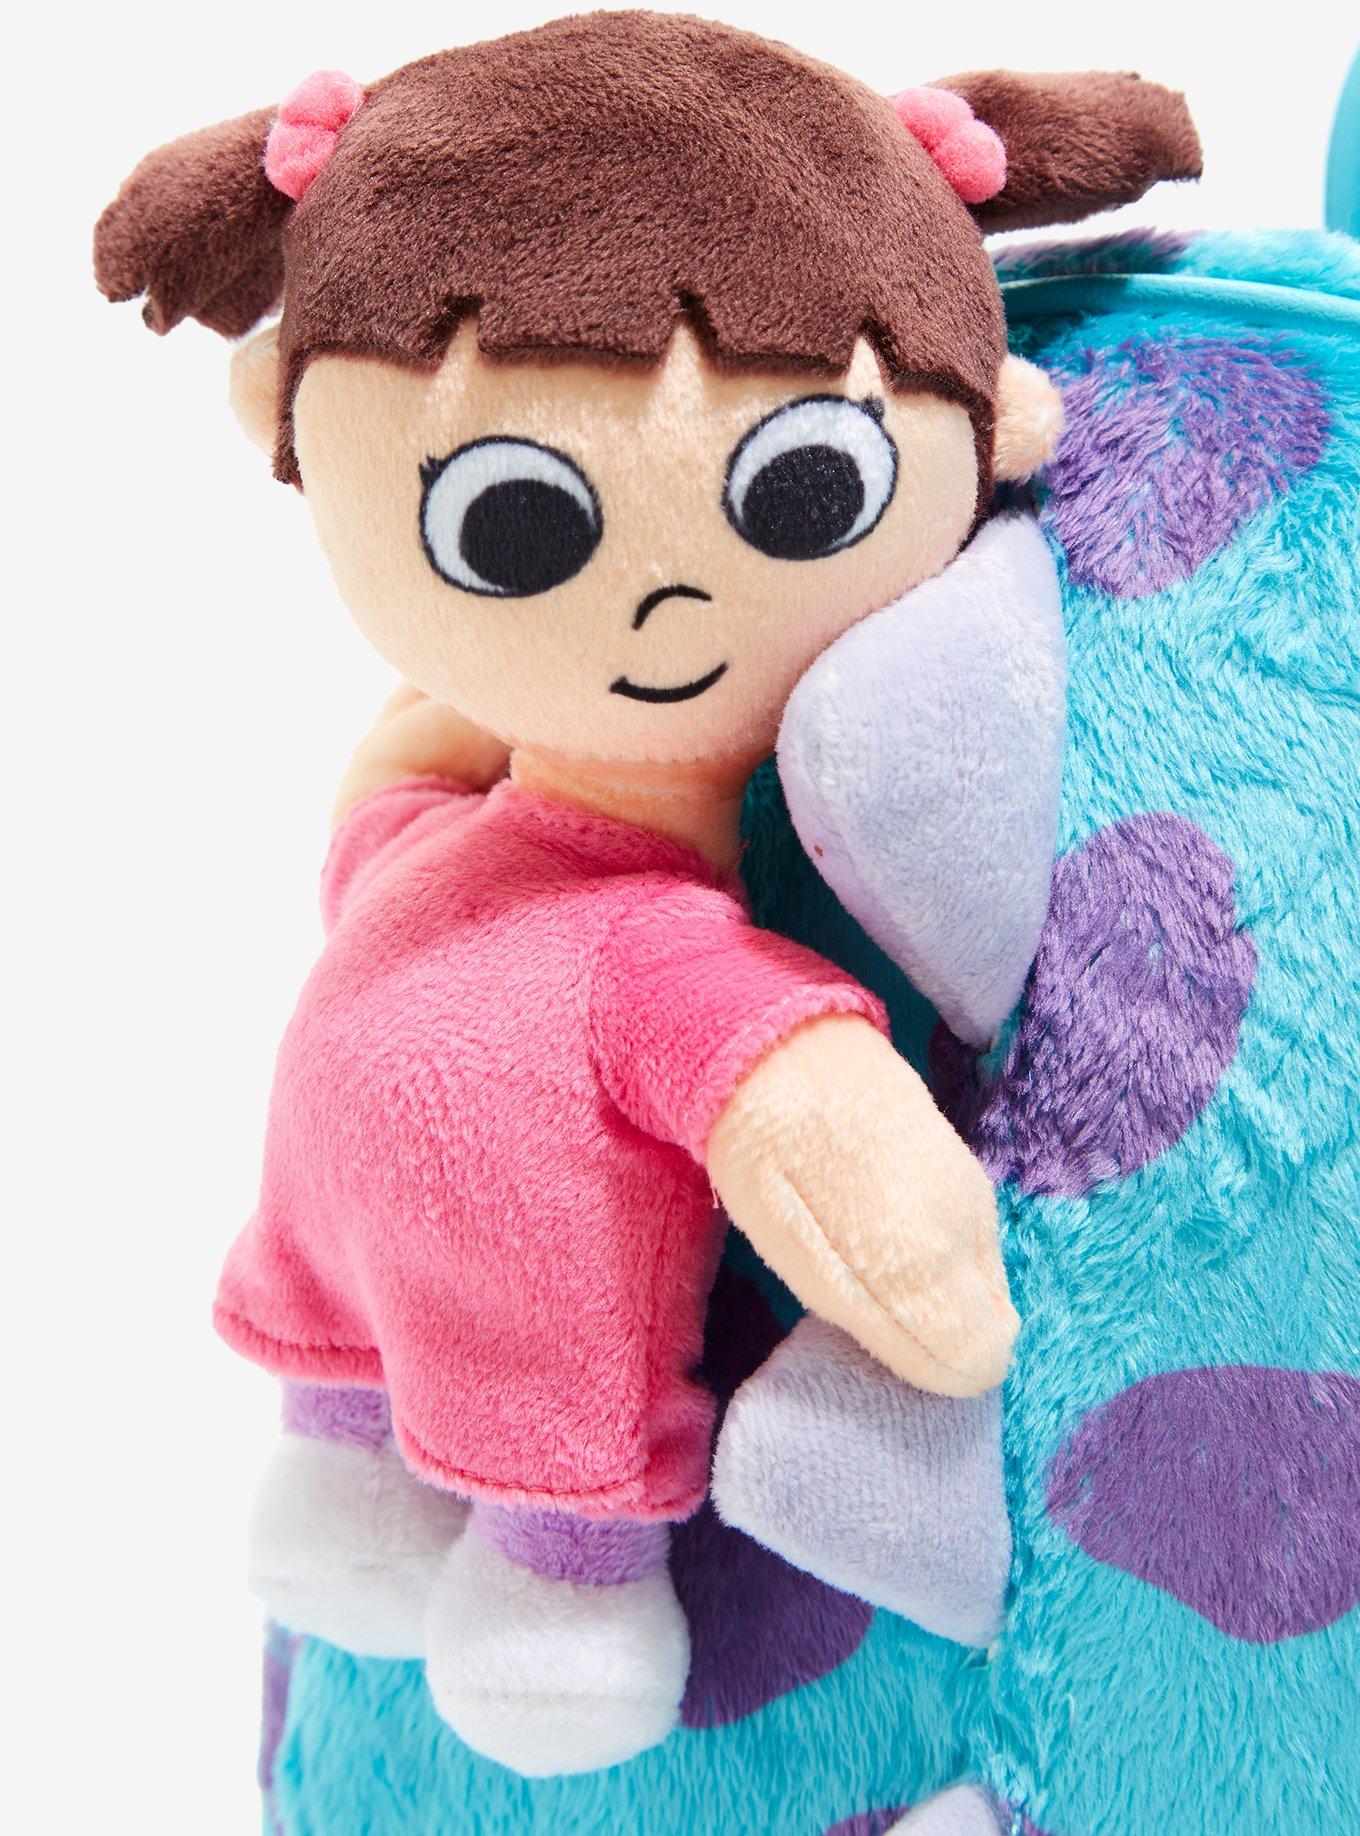 Her Universe Disney Pixar Monsters Inc. Boo & Sulley Plush Mini Backpack -  BoxLunch Exclusive